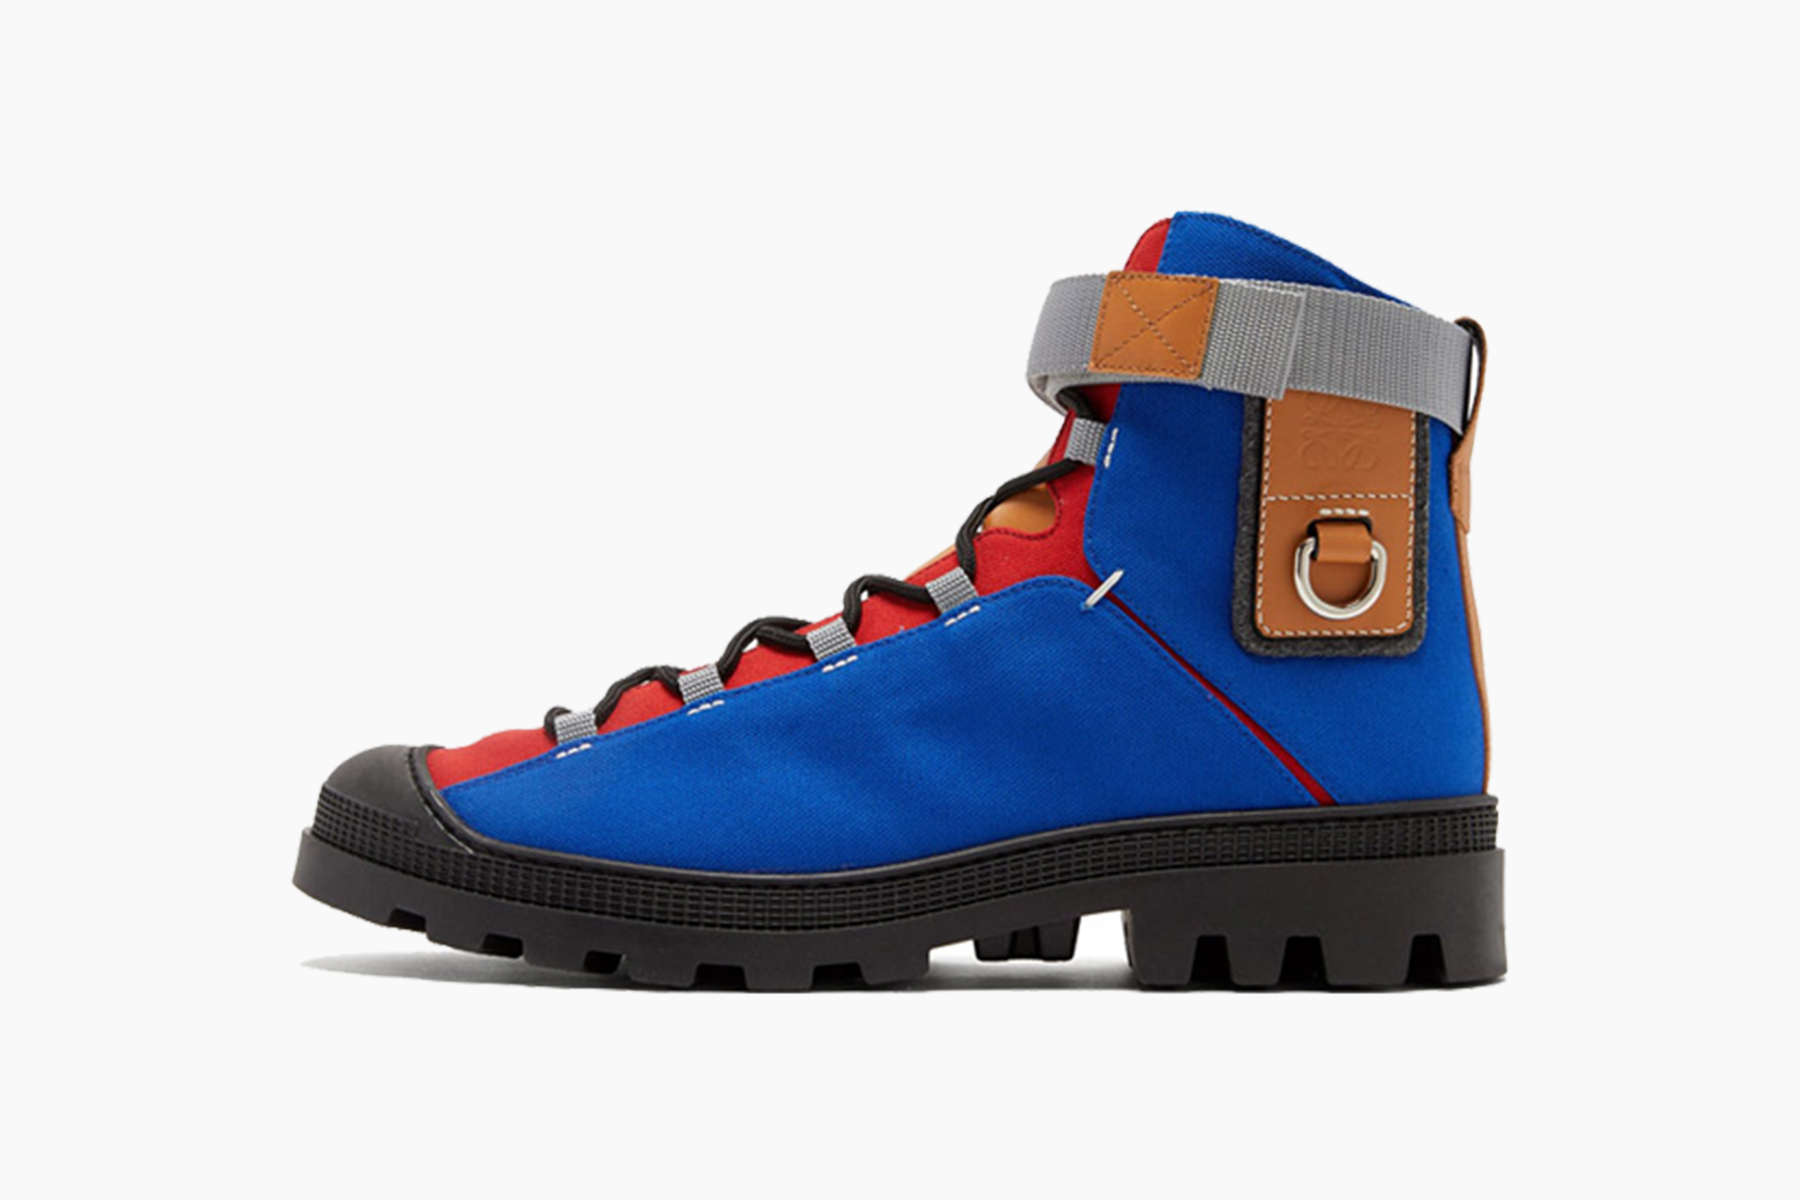 EYE/LOEWE/NATURE Logo-Patch Canvas Hiking Boots